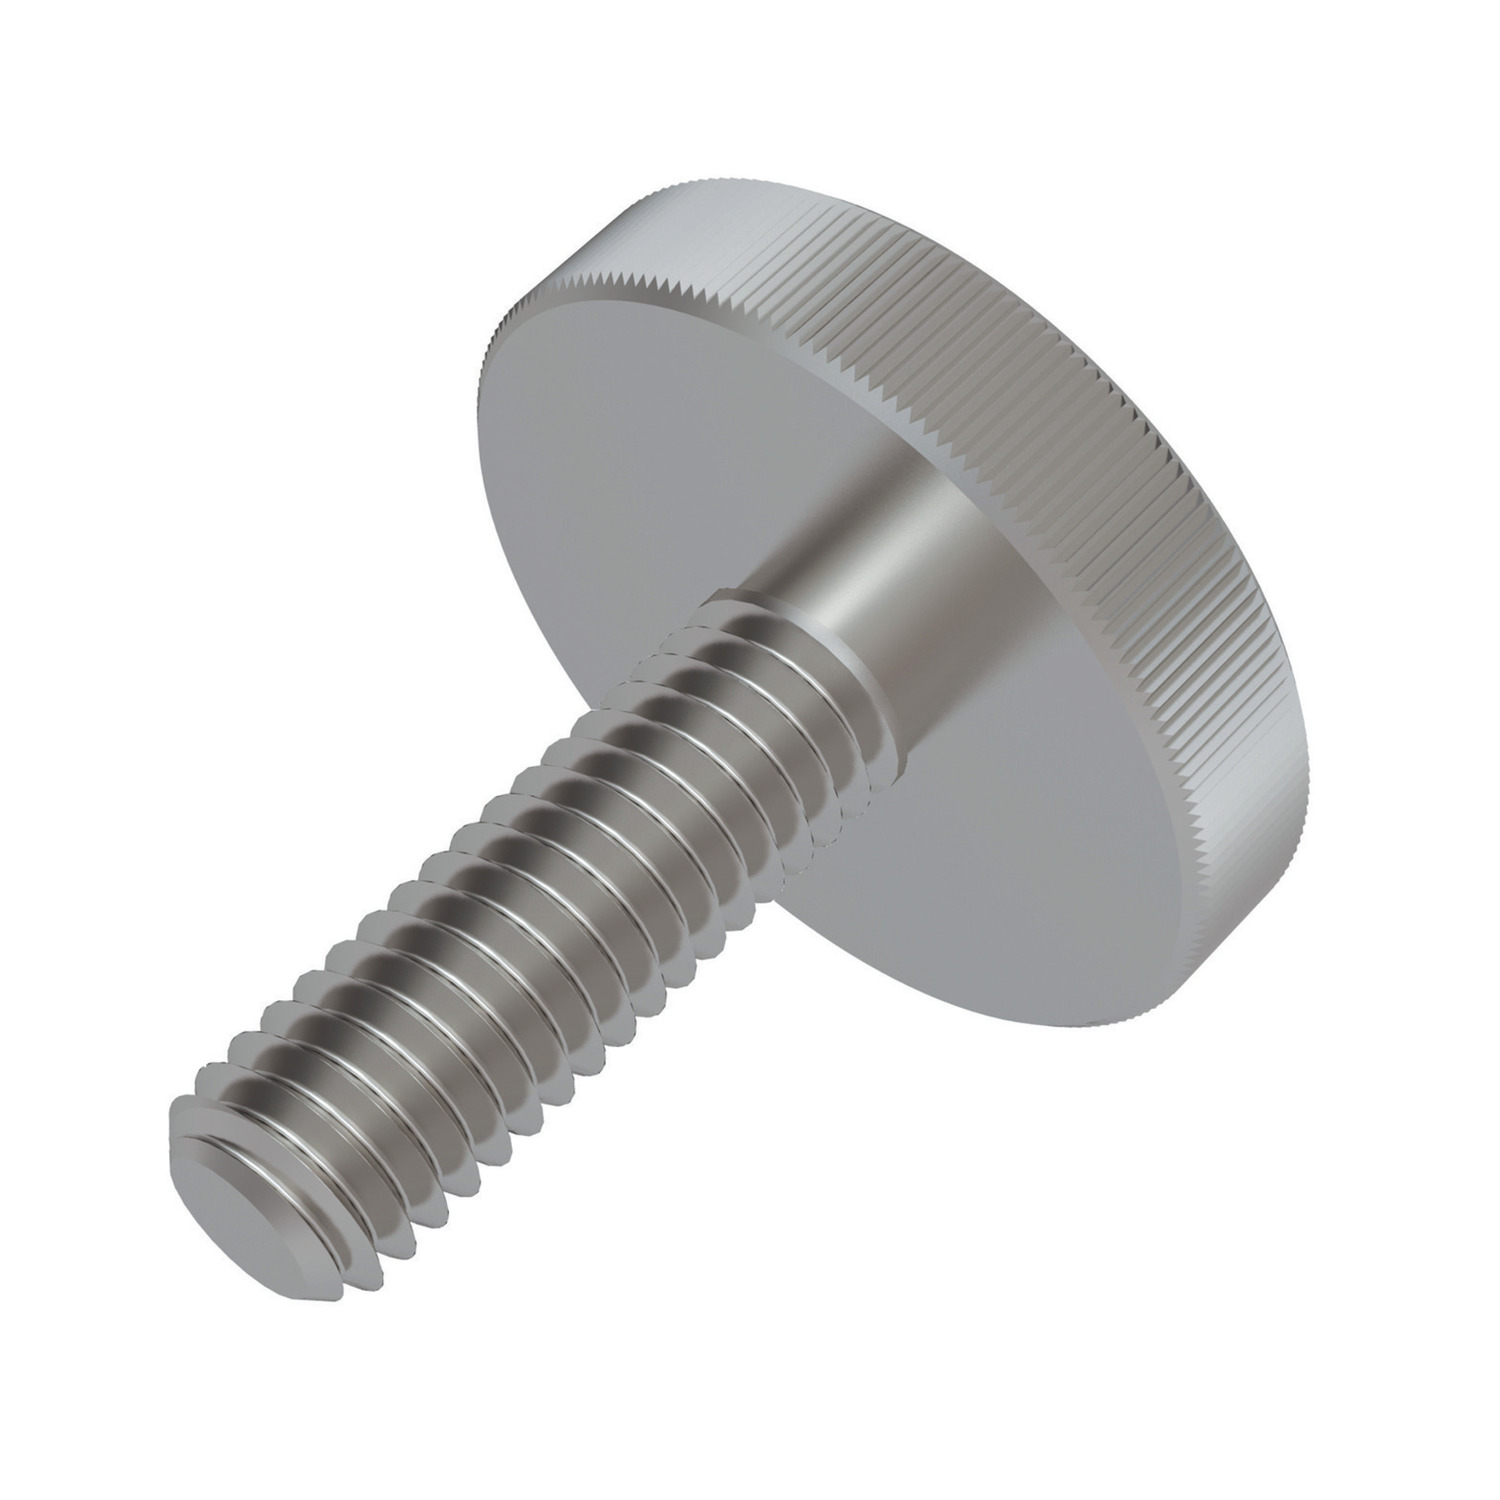 P0405.030-008-A4 Knurled Thumb Screw M3x8 A4 s/s 